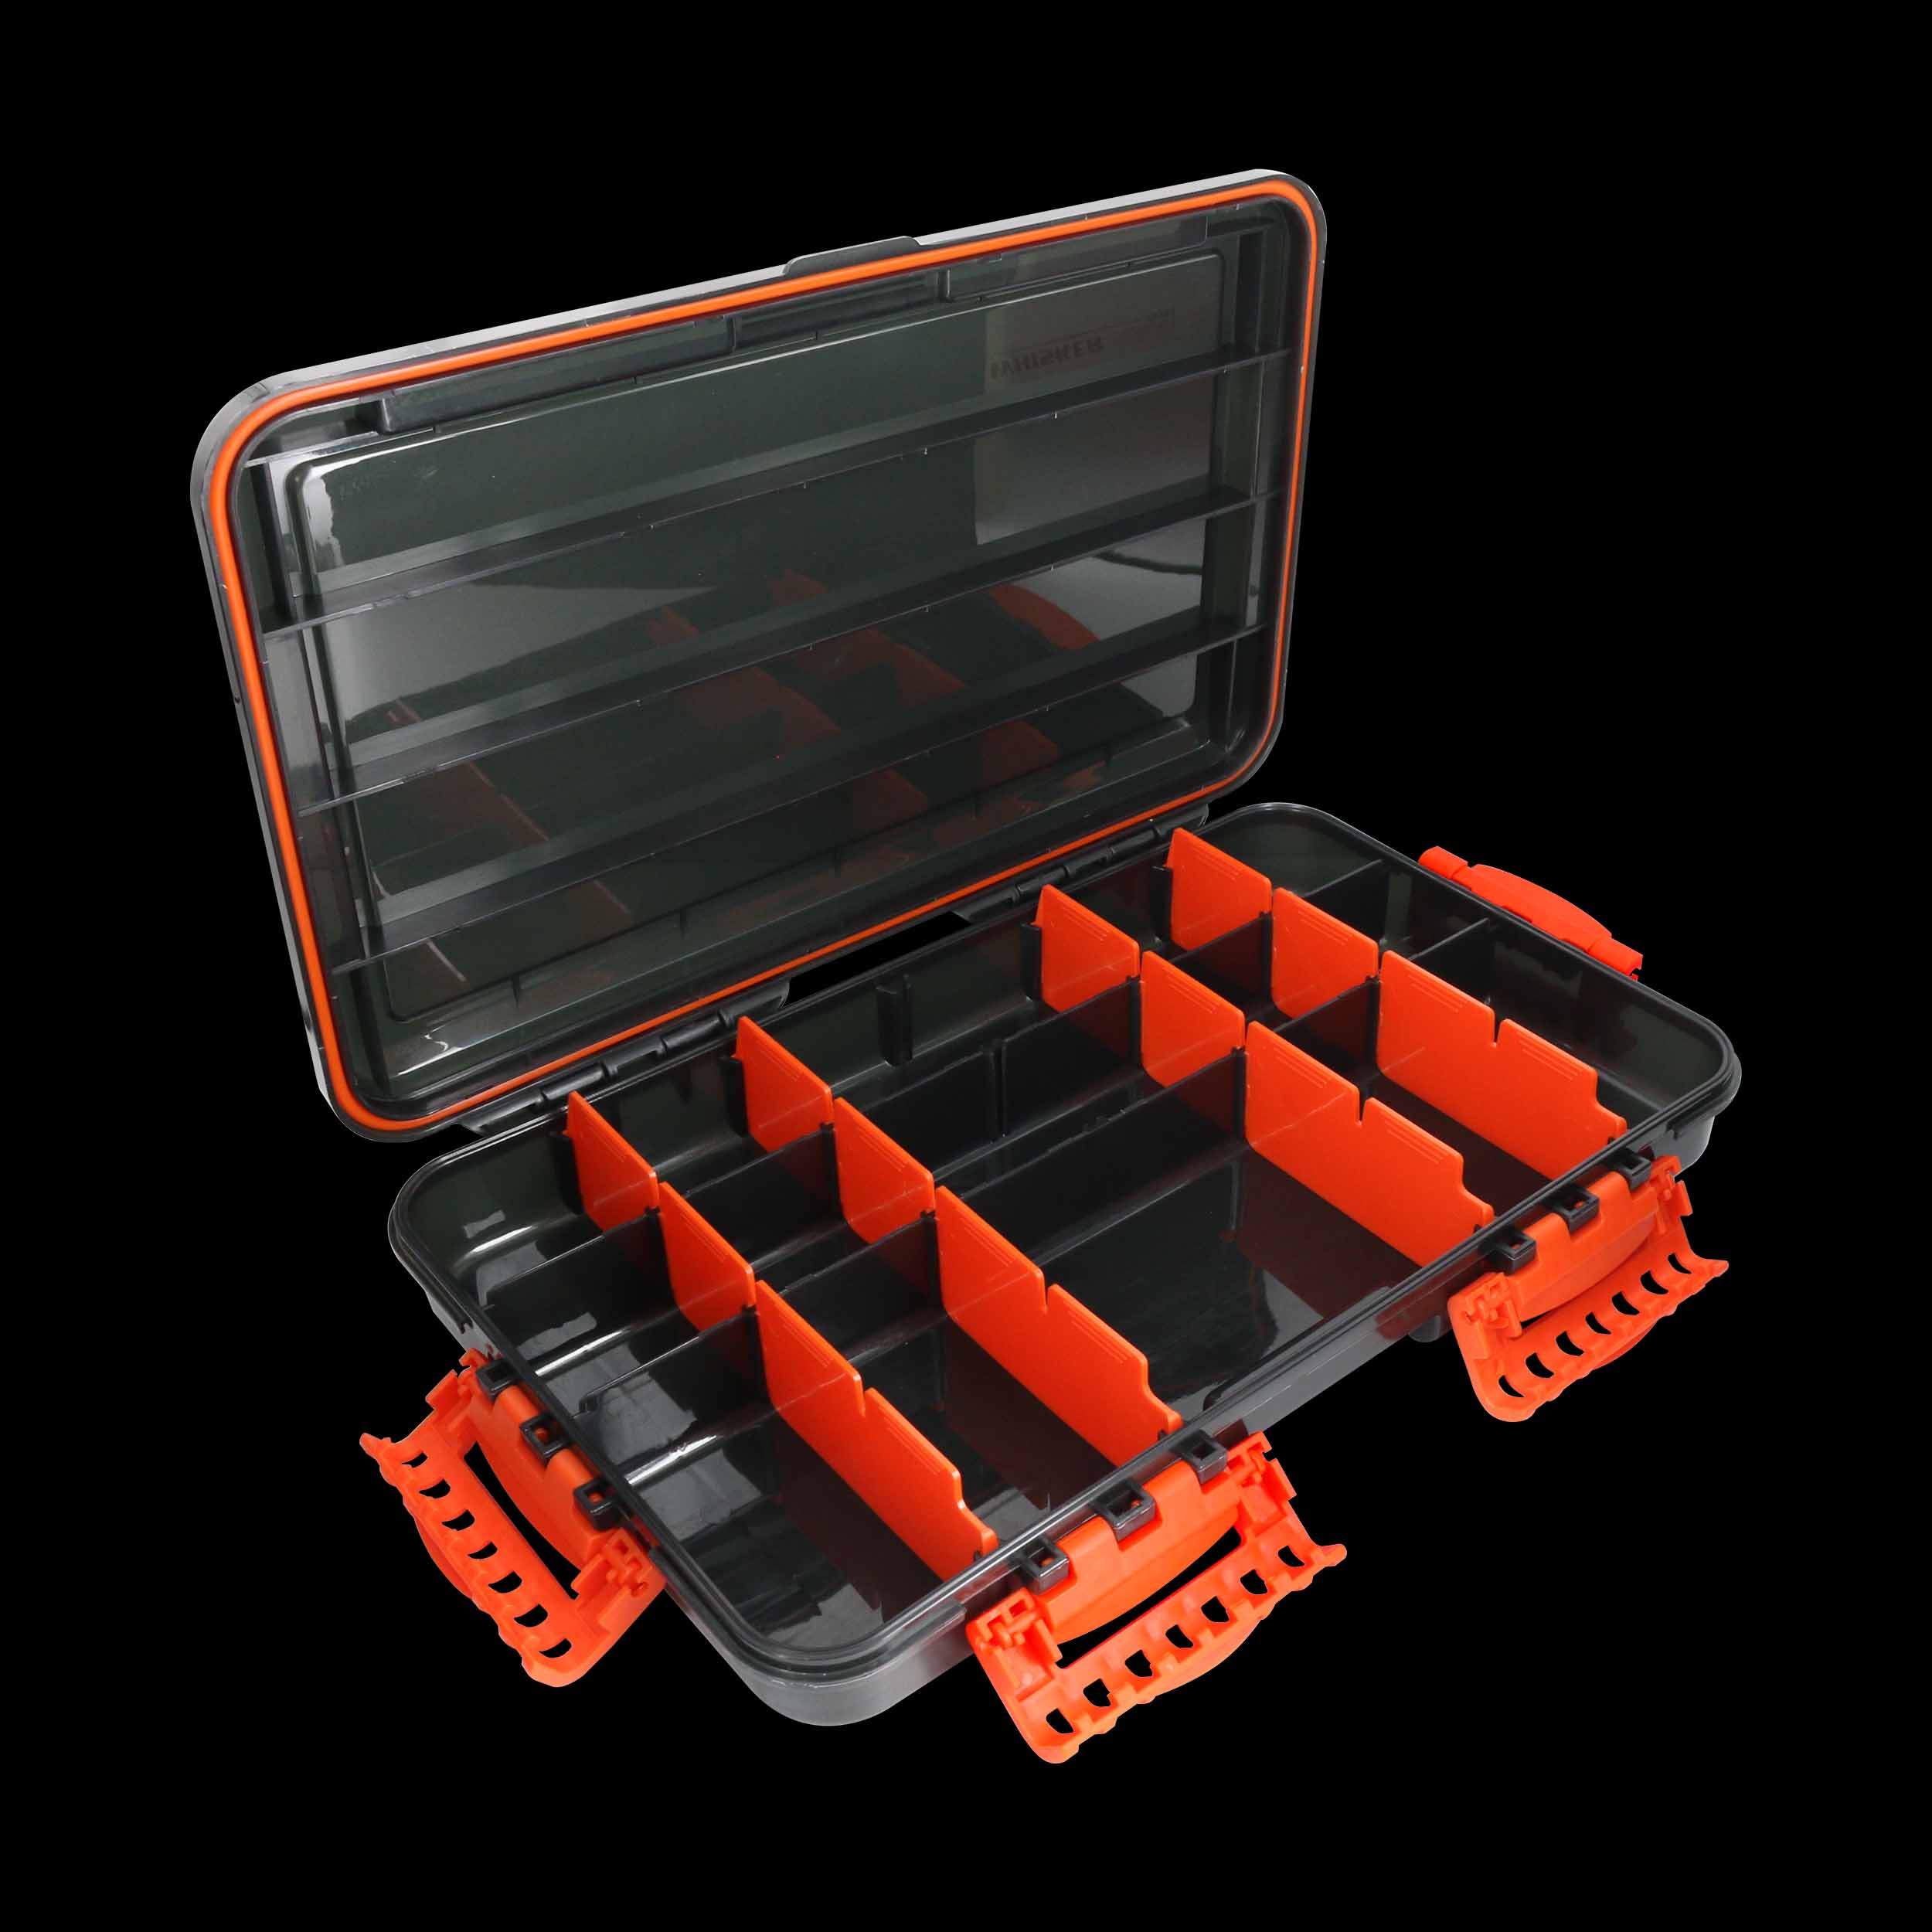 Large Plastic Tackle Box Storage Organizer Box 3700 Utility Tray with  adjustable dividers 2 PACK